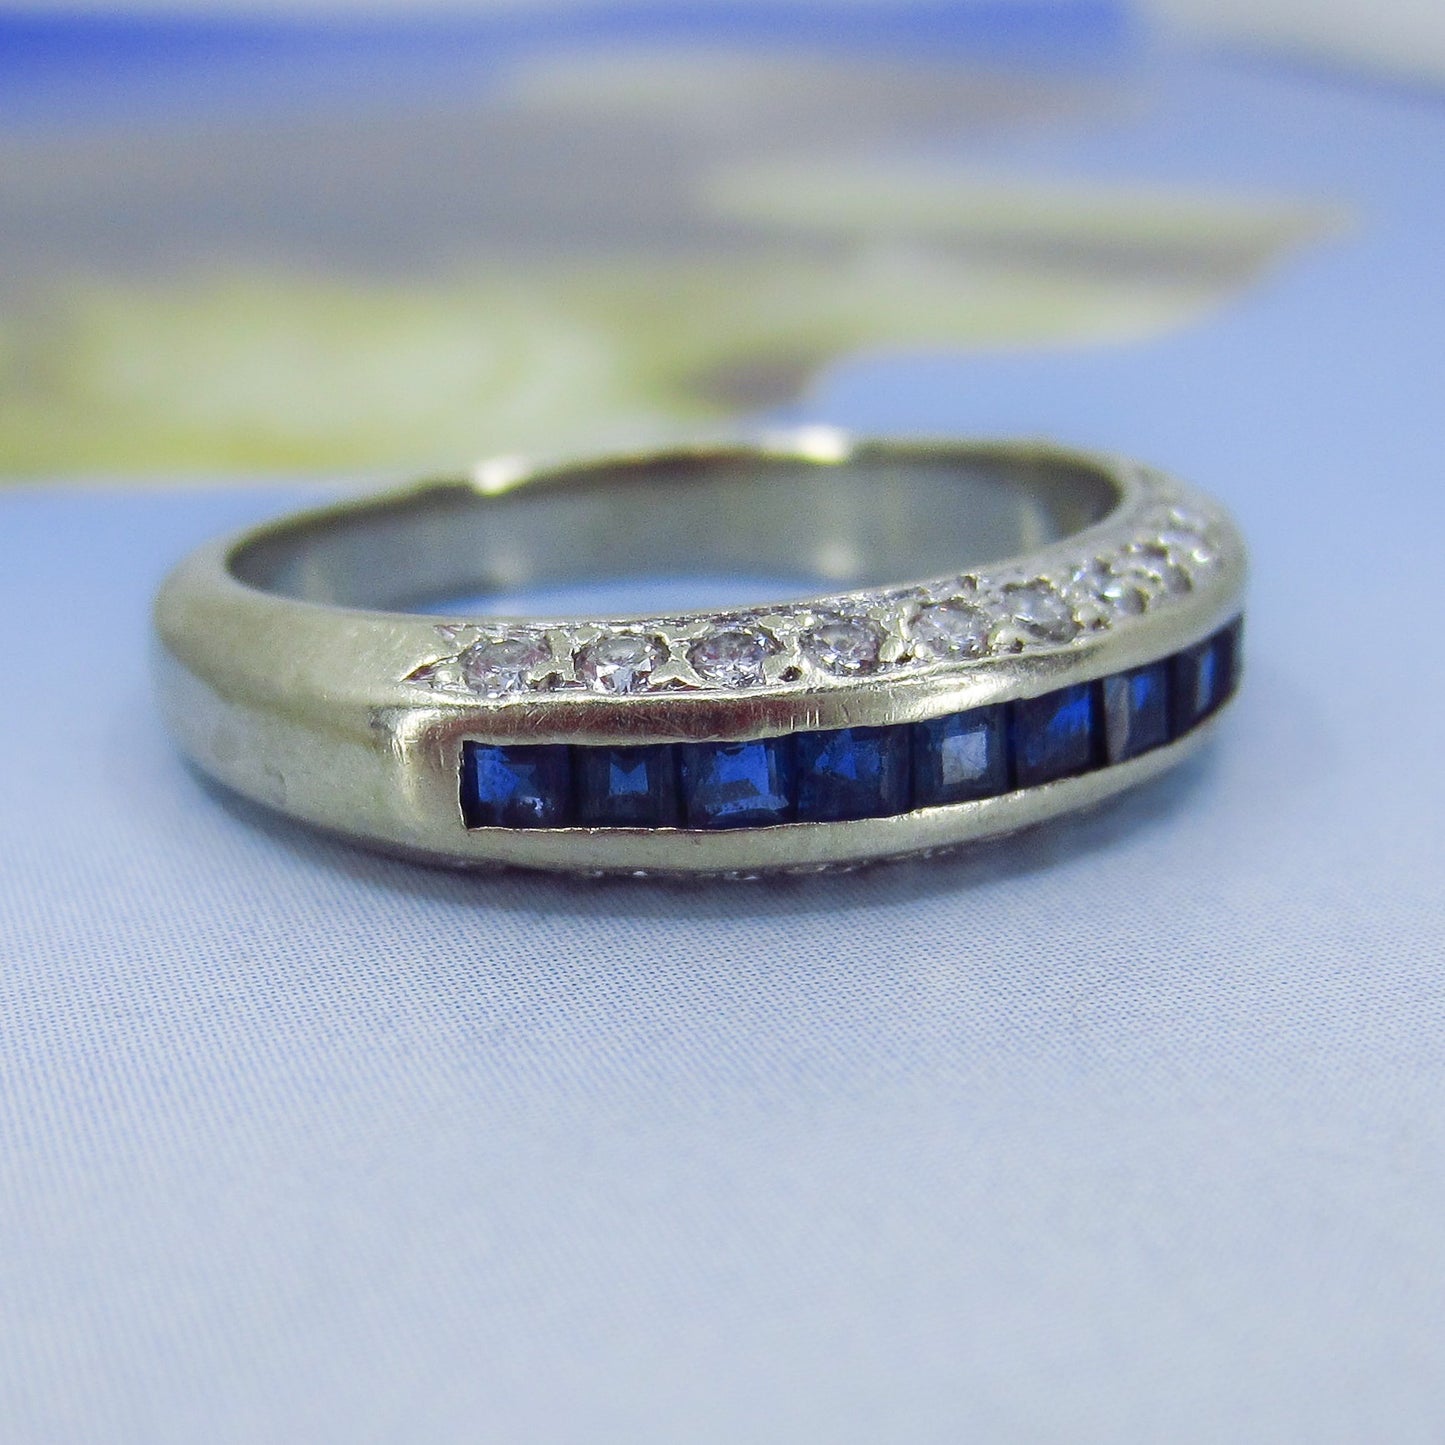 SOLD—Late Art Deco Sapphire and Diamond Band 14k c. 1940